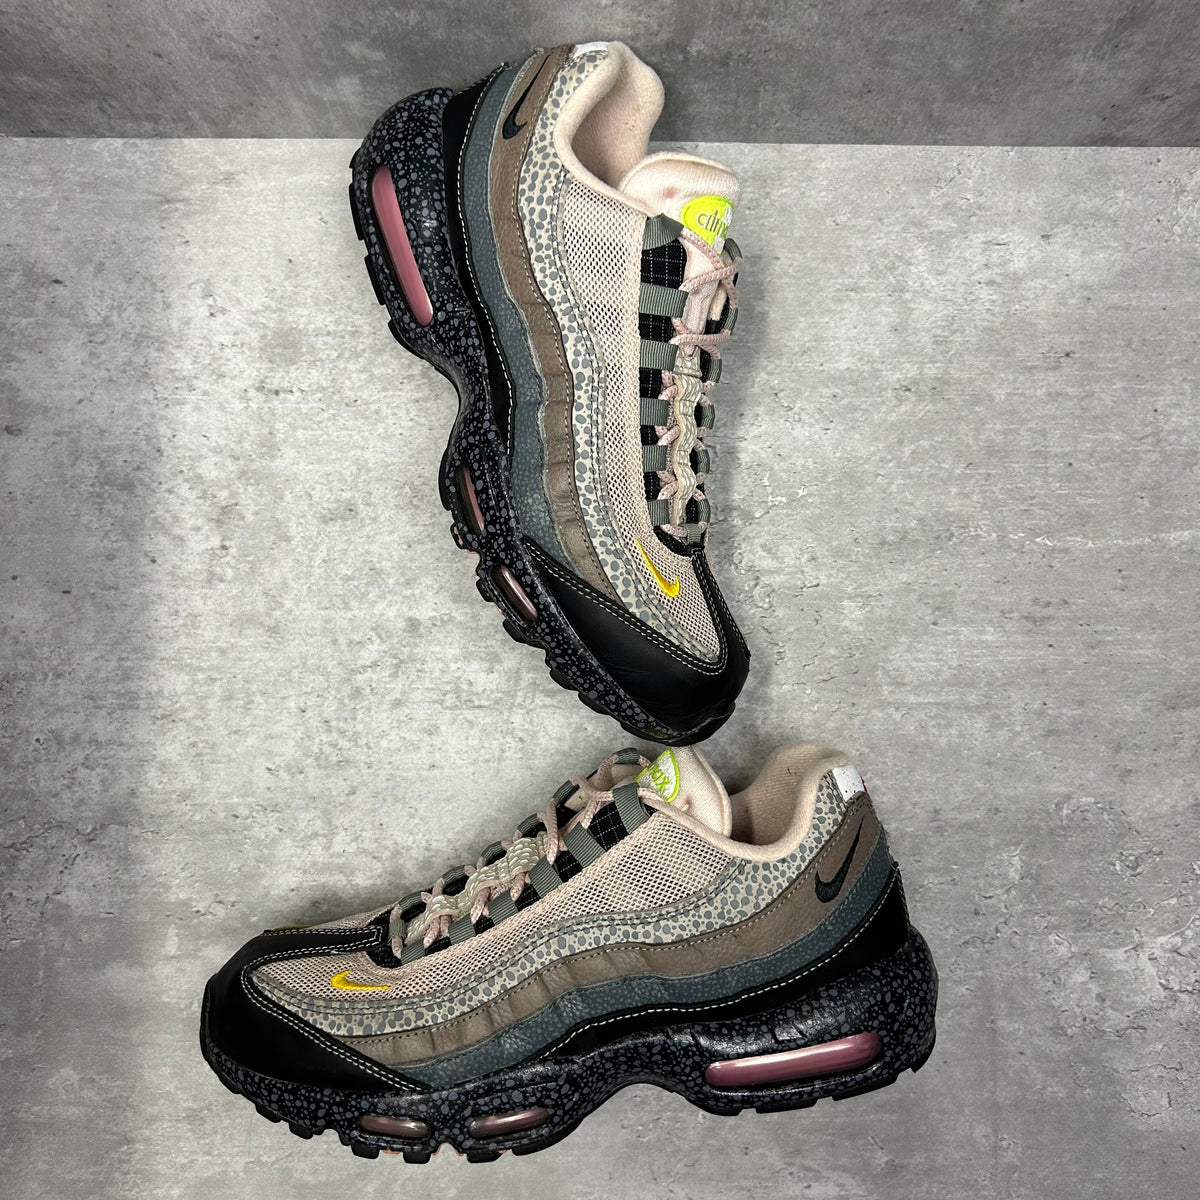 Nike Airmax 95 Size? 20 for 20